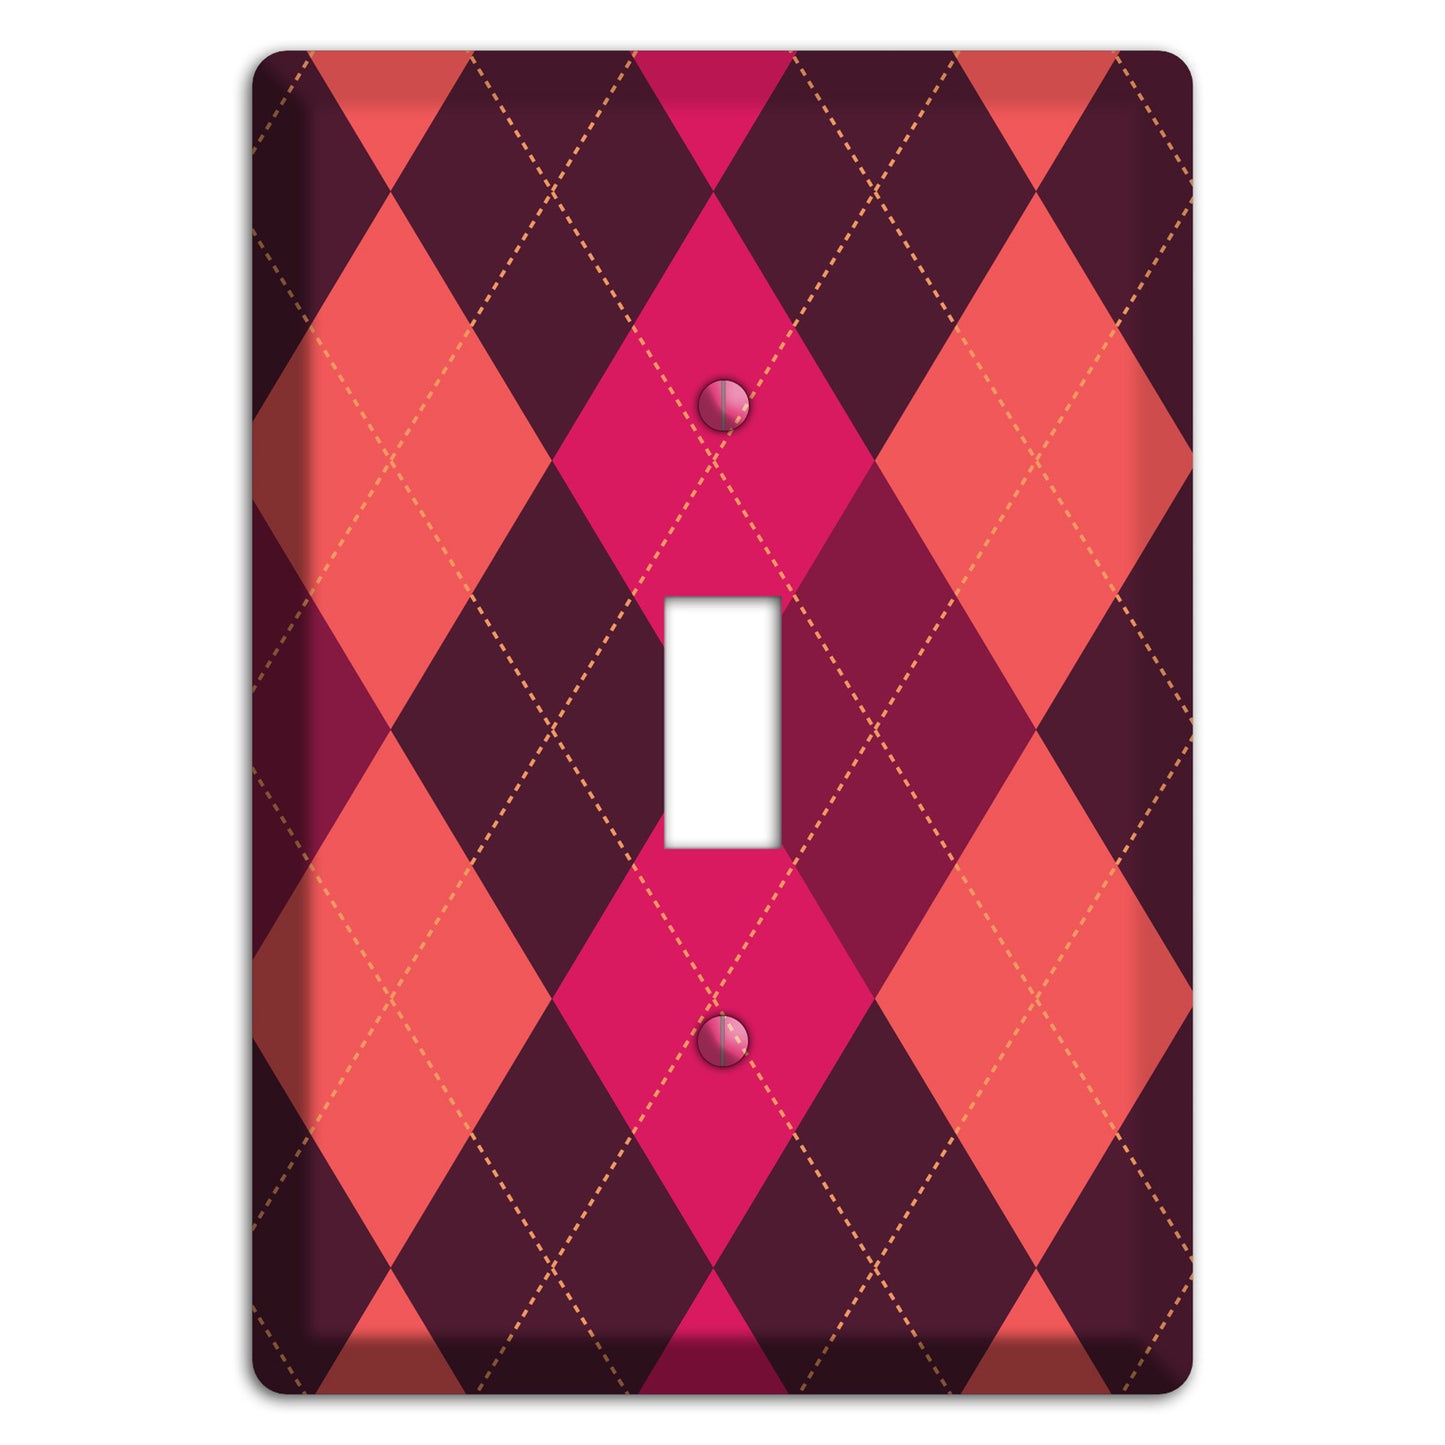 Orange and Pink Argyle Cover Plates